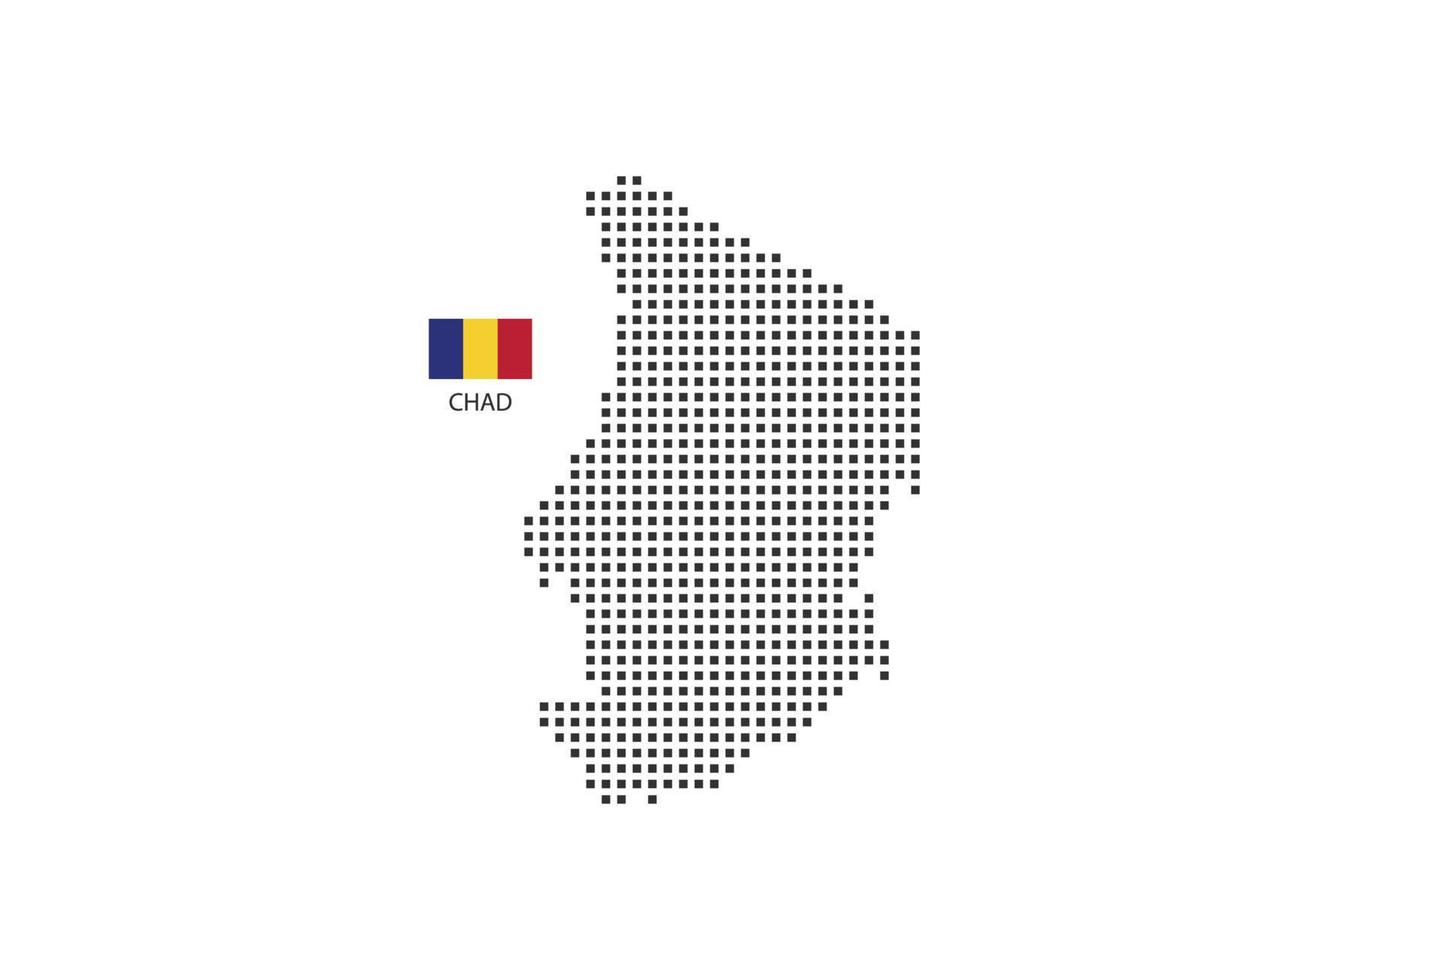 Vector square pixel dotted map of Chad isolated on white background with Chad flag.